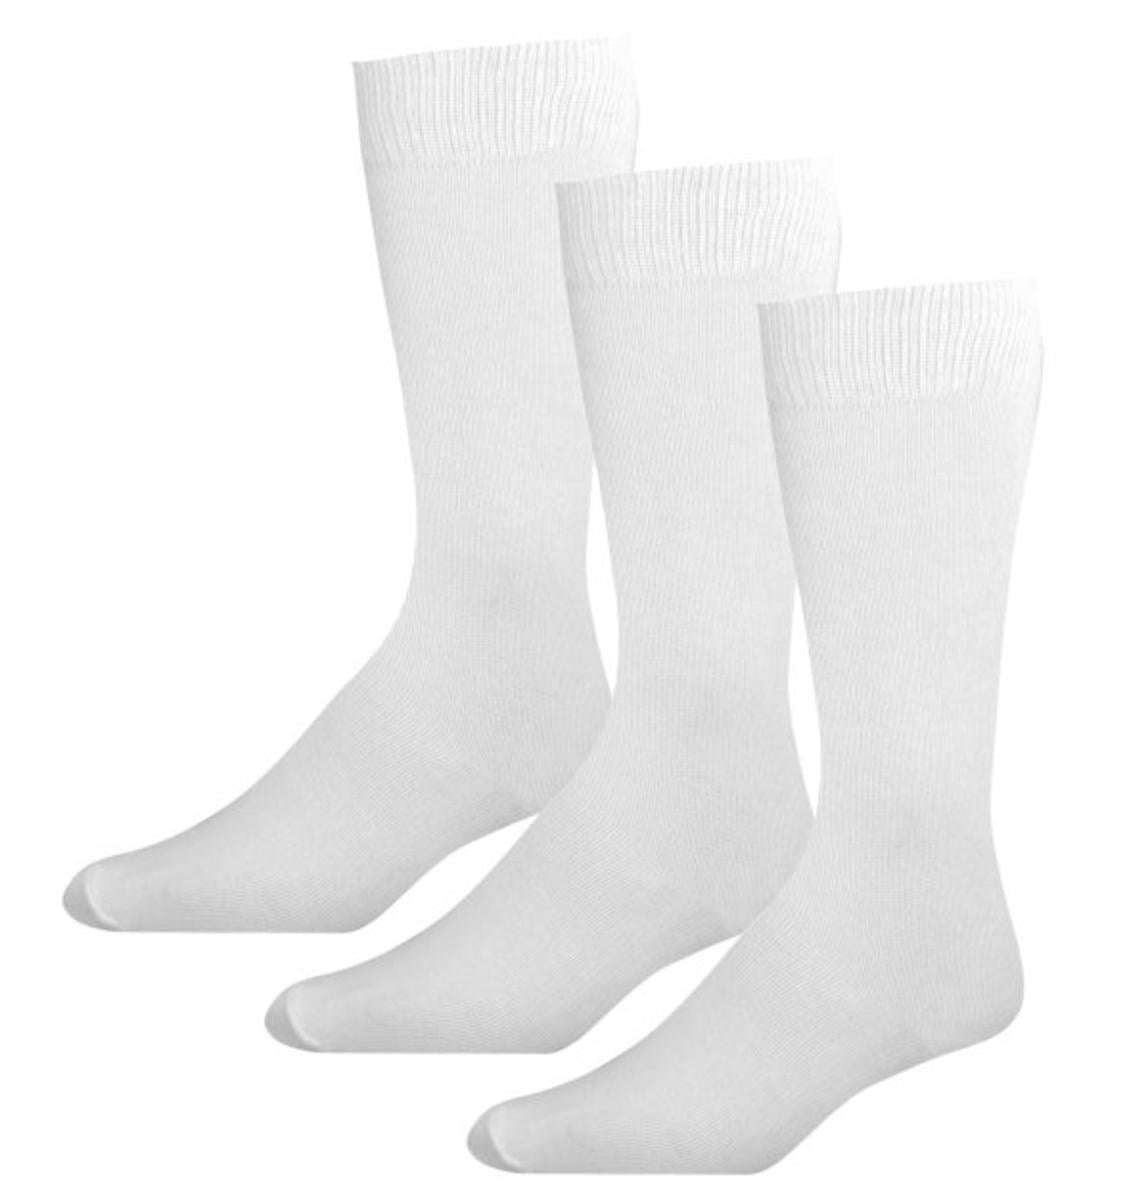 3-Pack of Warm and Moisture Wicking White Polypropylene Sock Liners ...